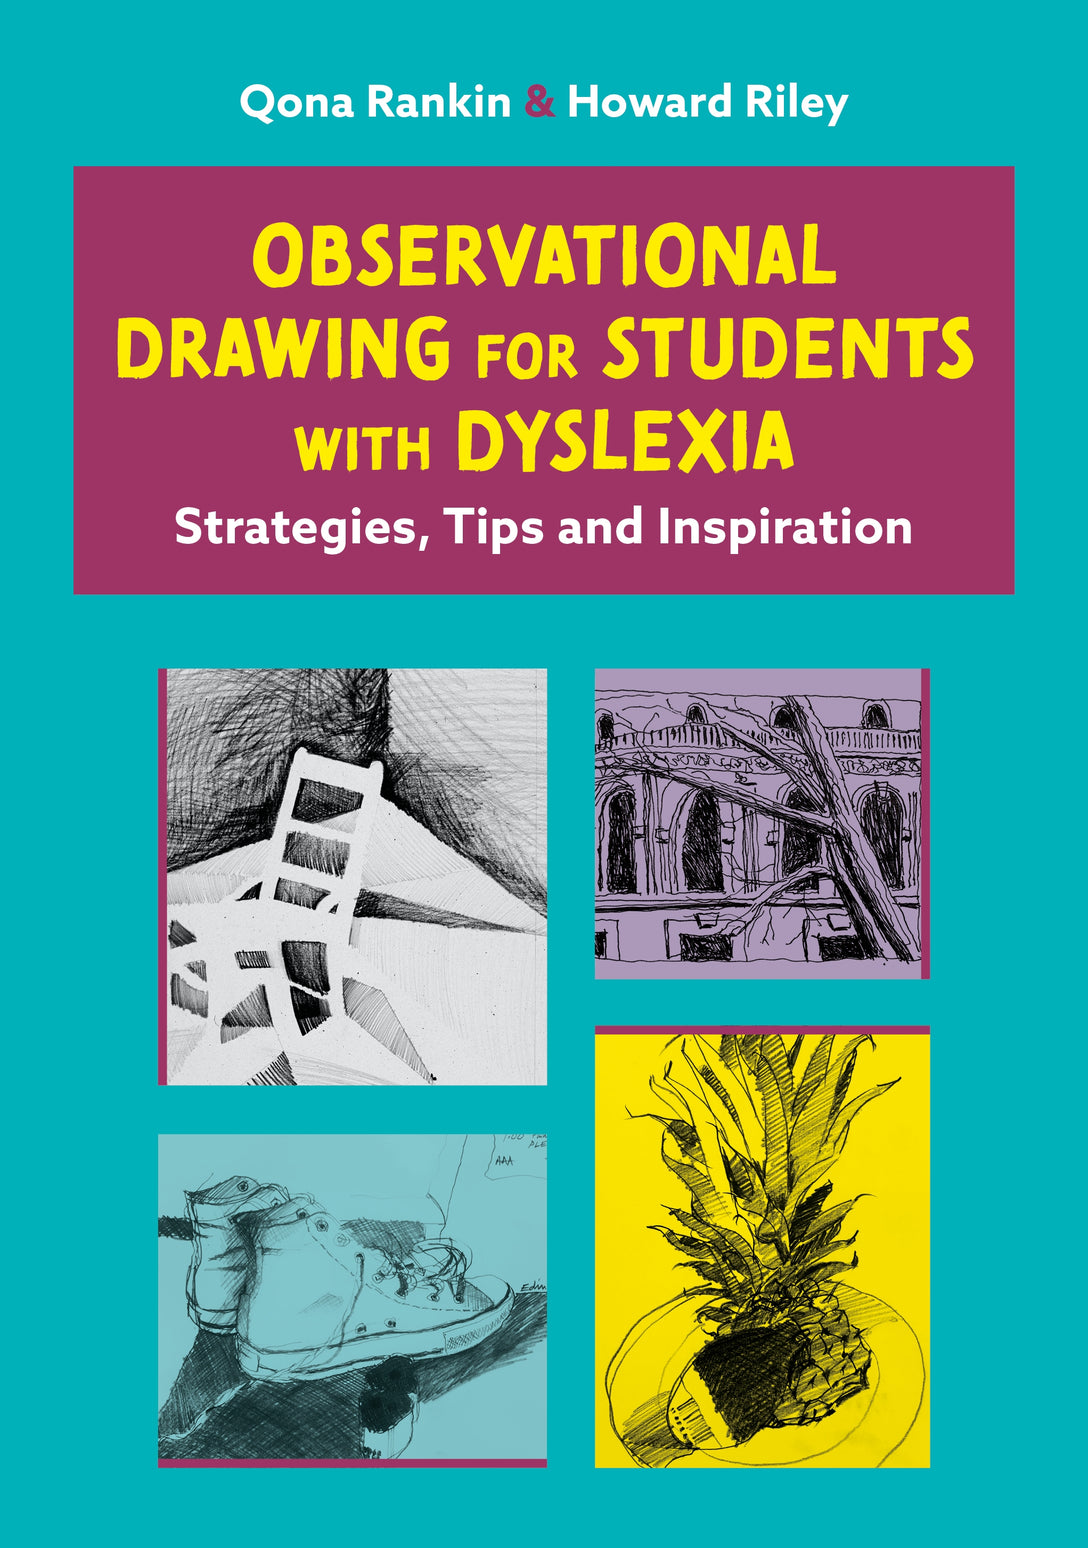 Observational Drawing for Students with Dyslexia by Qona Rankin, Howard Riley, Qona Rankin and Howard Riley